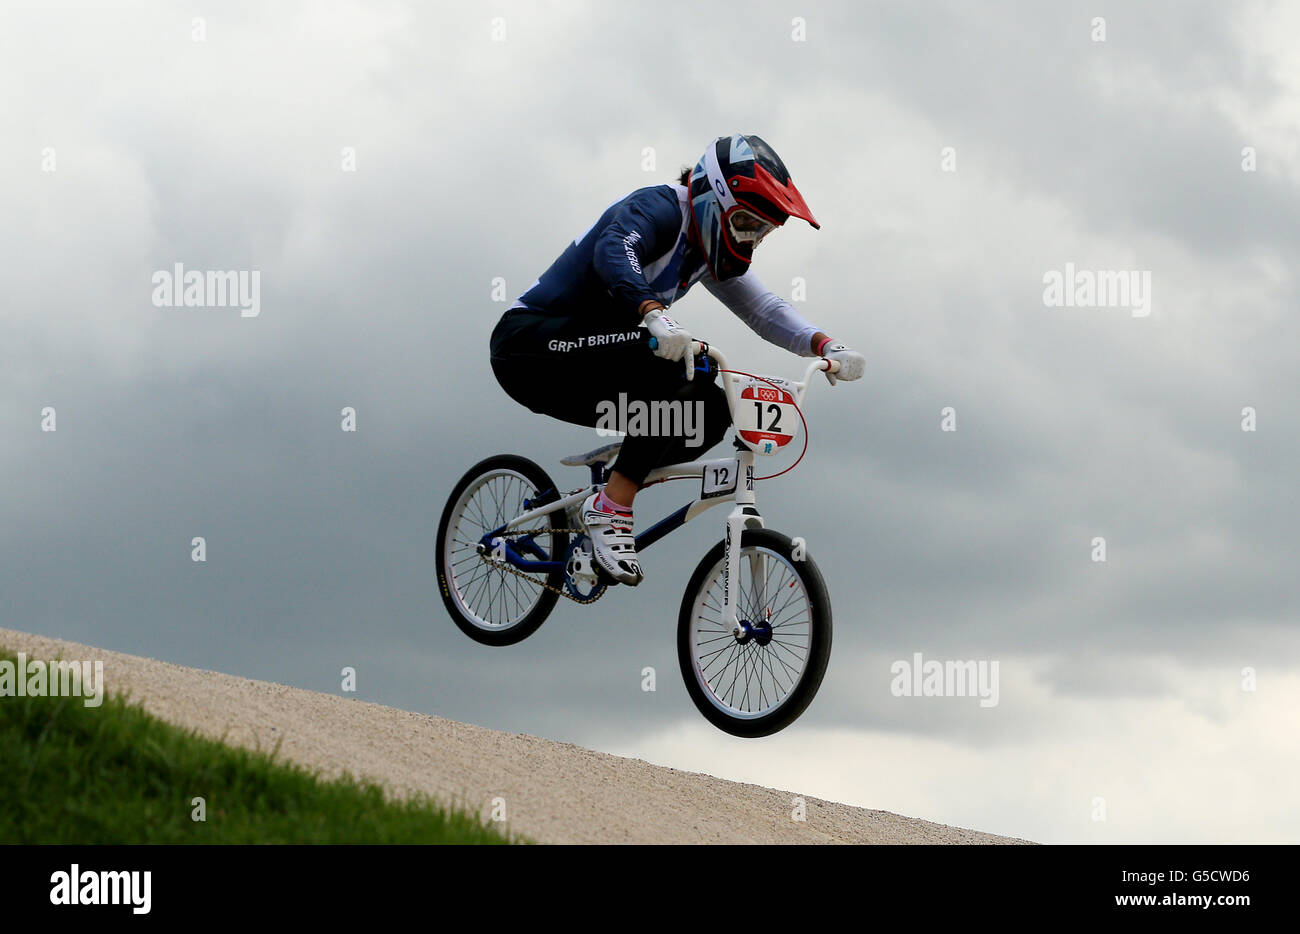 Great Britain's Shanaze Reade during the Women's BMX Seeding Run at the BMX Track in the Olympic Park, on the twelfth day of the London 2012 Olympics. Stock Photo